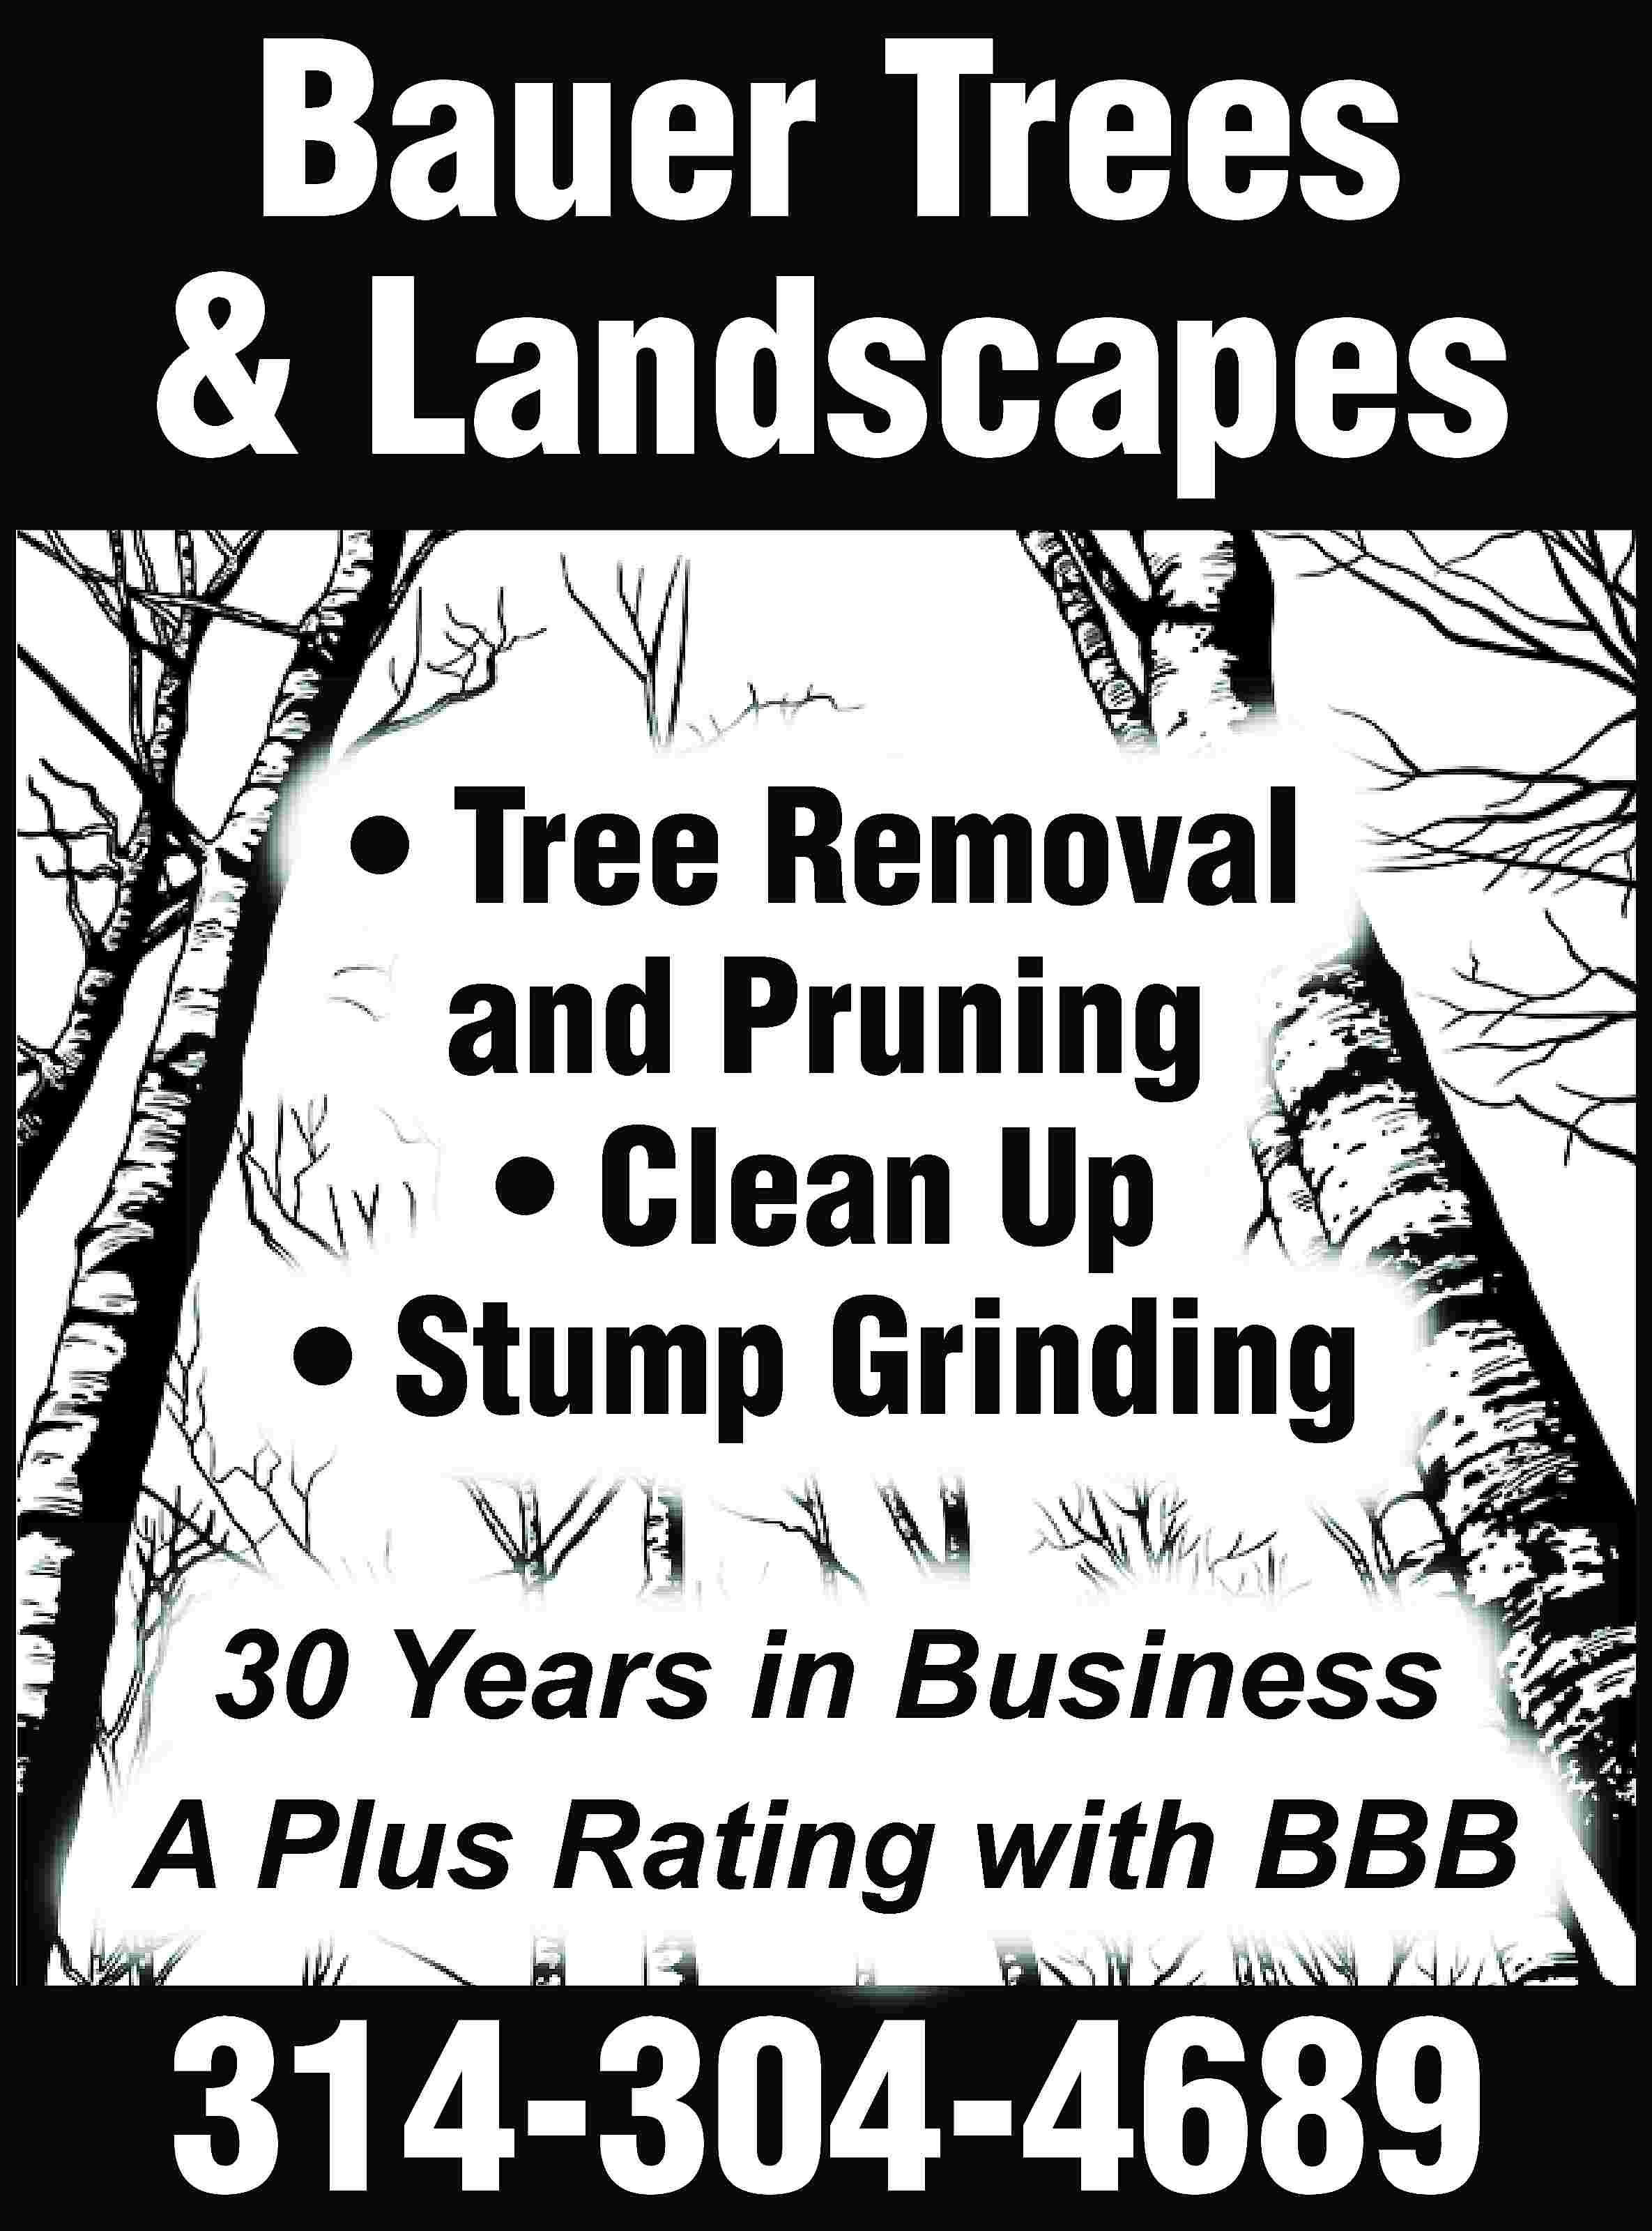 Bauer Trees & Landscapes •  Bauer Trees & Landscapes • Tree Removal and Pruning • Clean Up • Stump Grinding 30 Years in Business A Plus Rating with BBB 314-304-4689